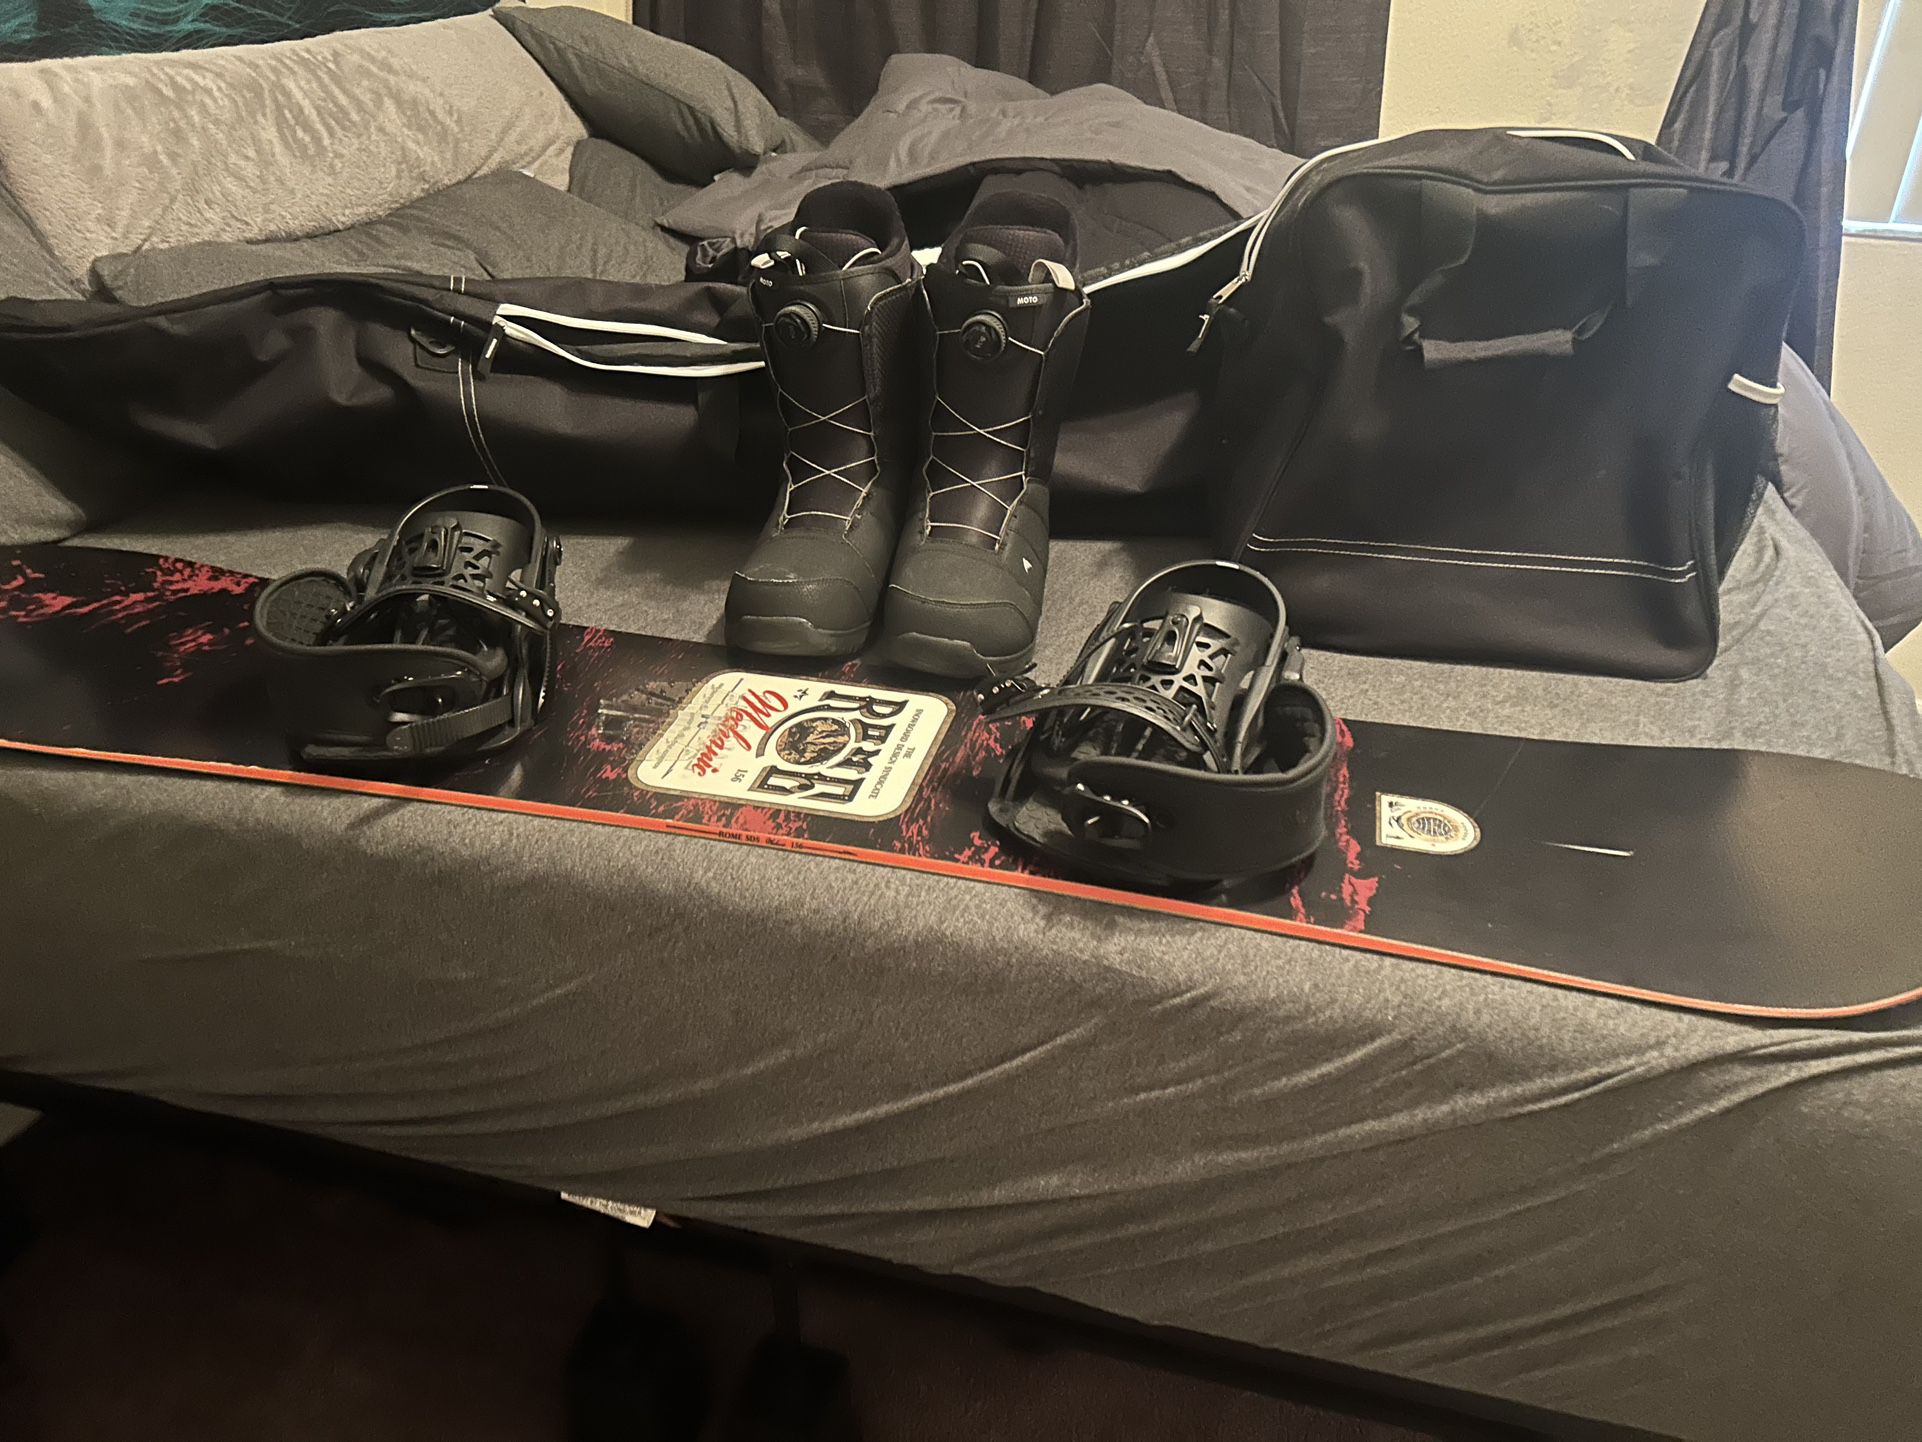 Rome SDS 154 Snowboard with bags, boots and bindings